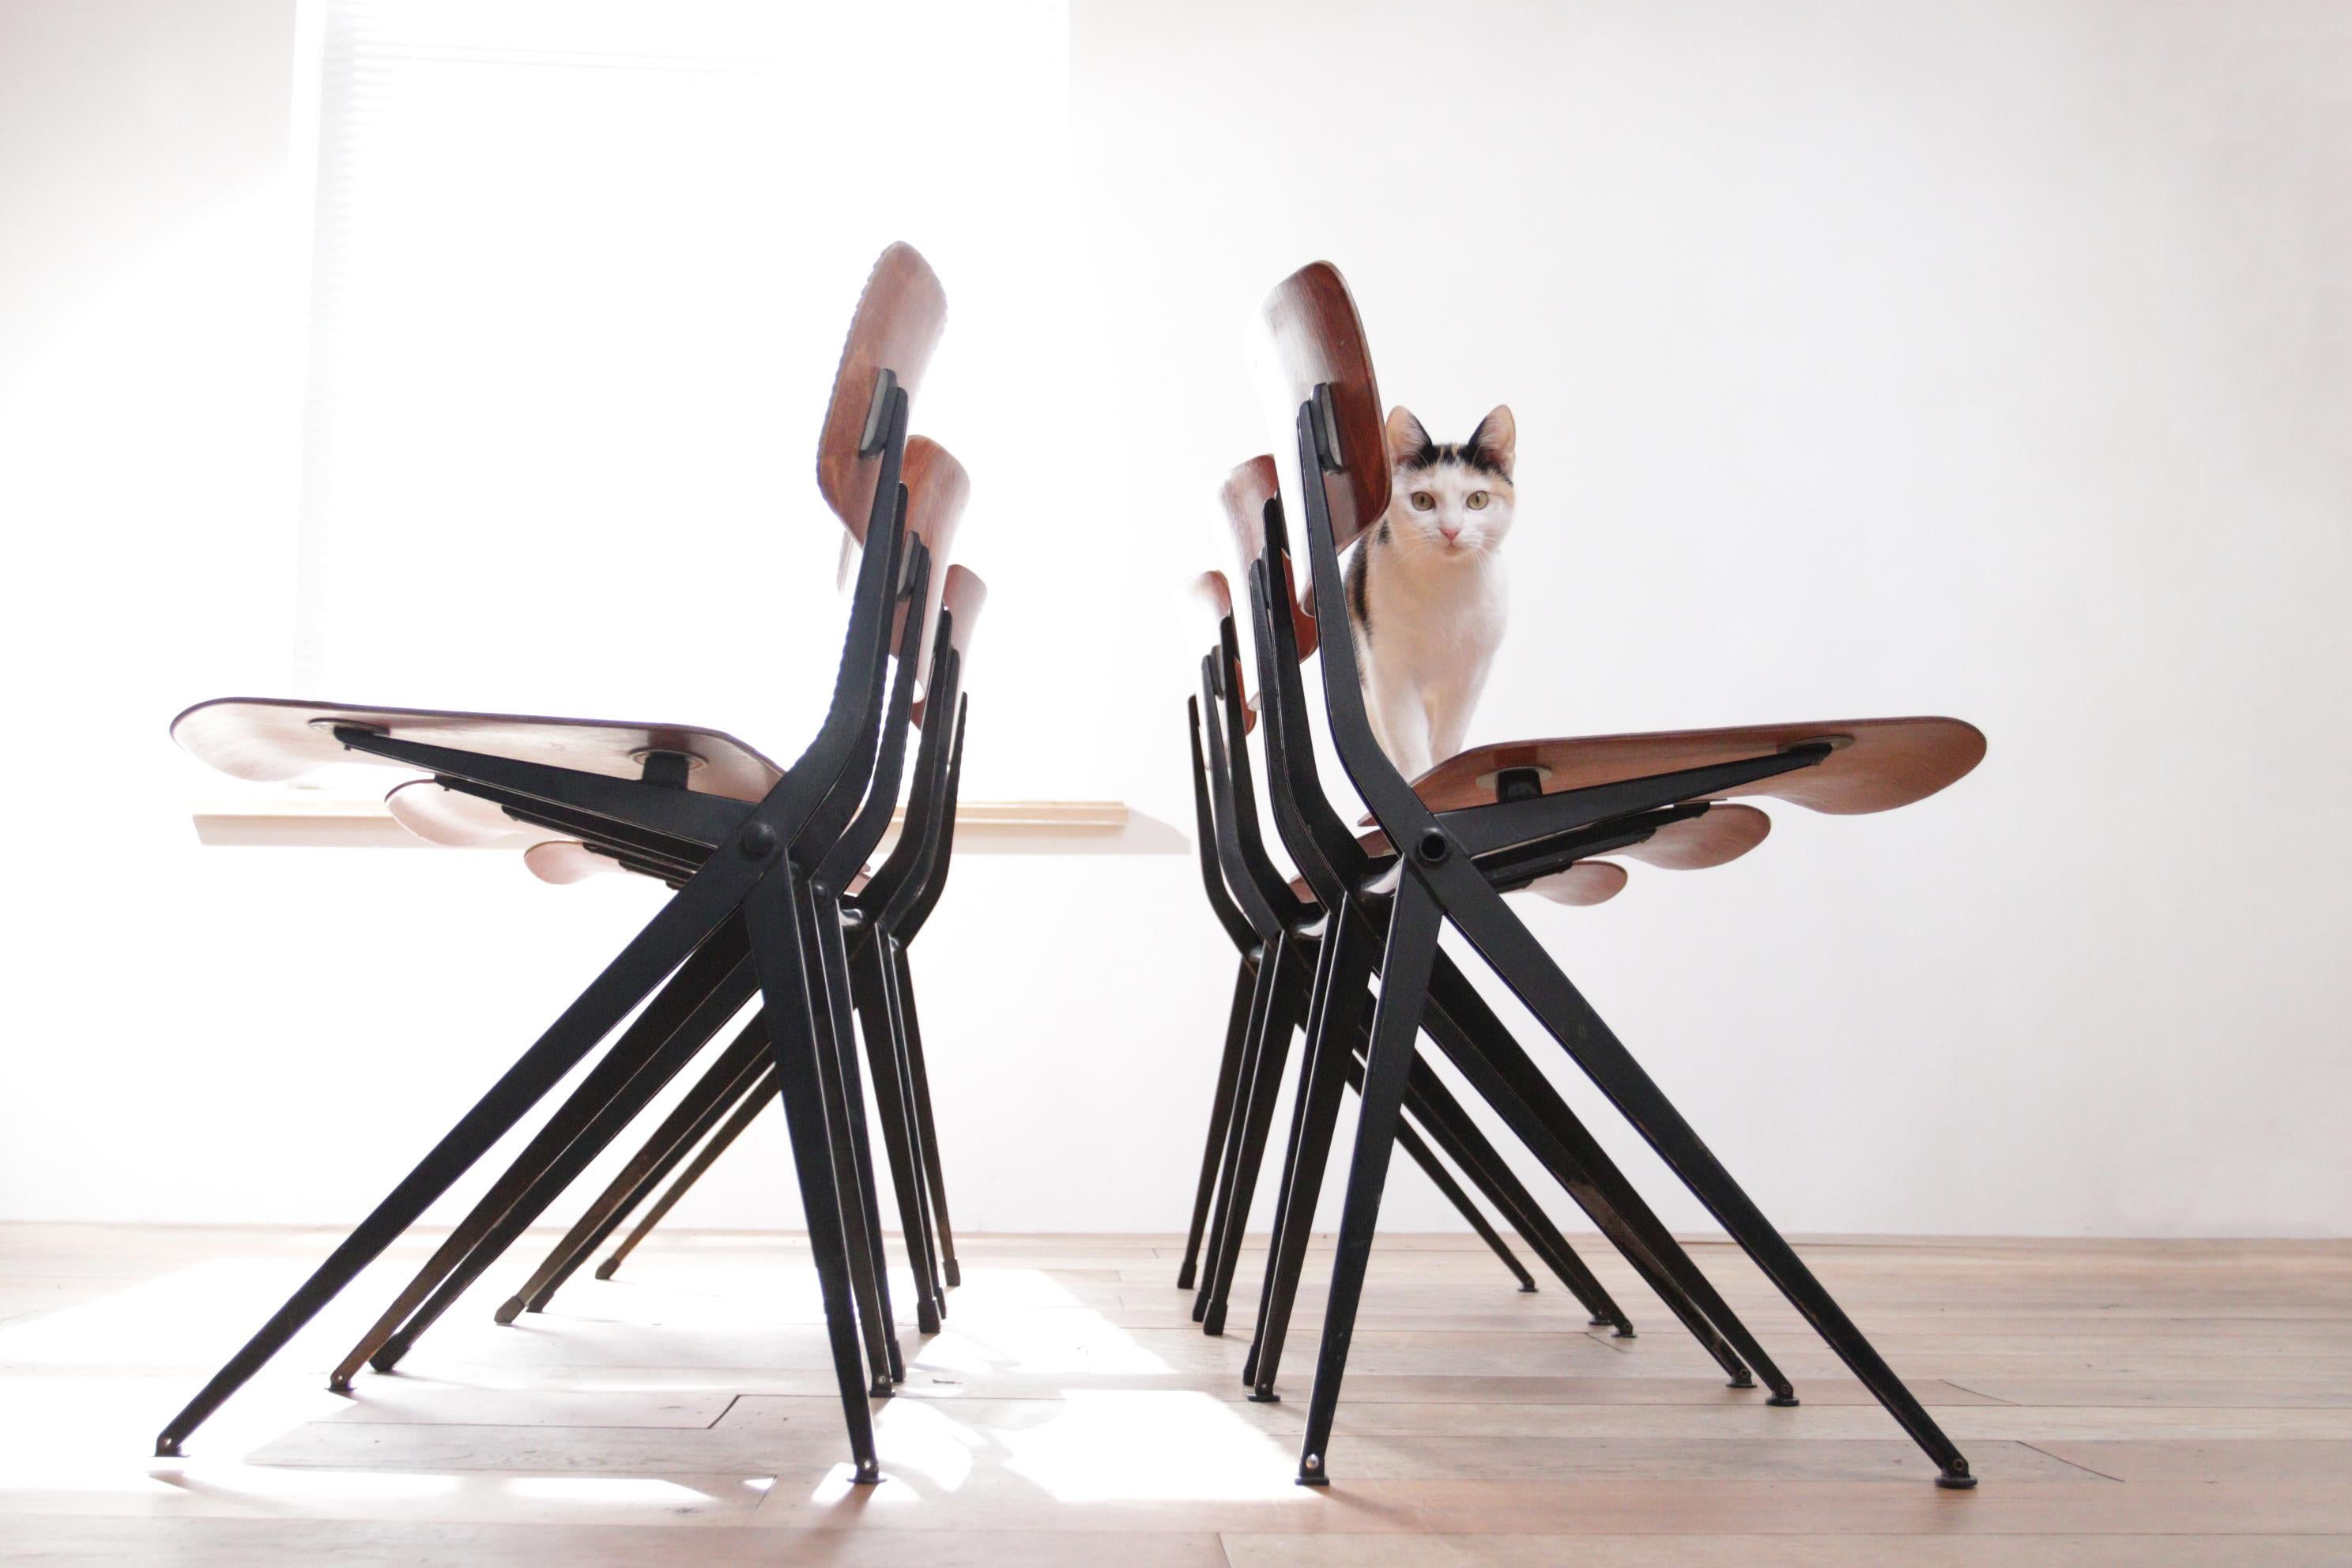 Wonderfull designed chairs by Ynske Kooistra for Marko in the 60s
Compass shape legs.
This design was inspired by the designs of Jean Prouve, which inspired several designers at the time.
The frame is made of steel and the seat is made of